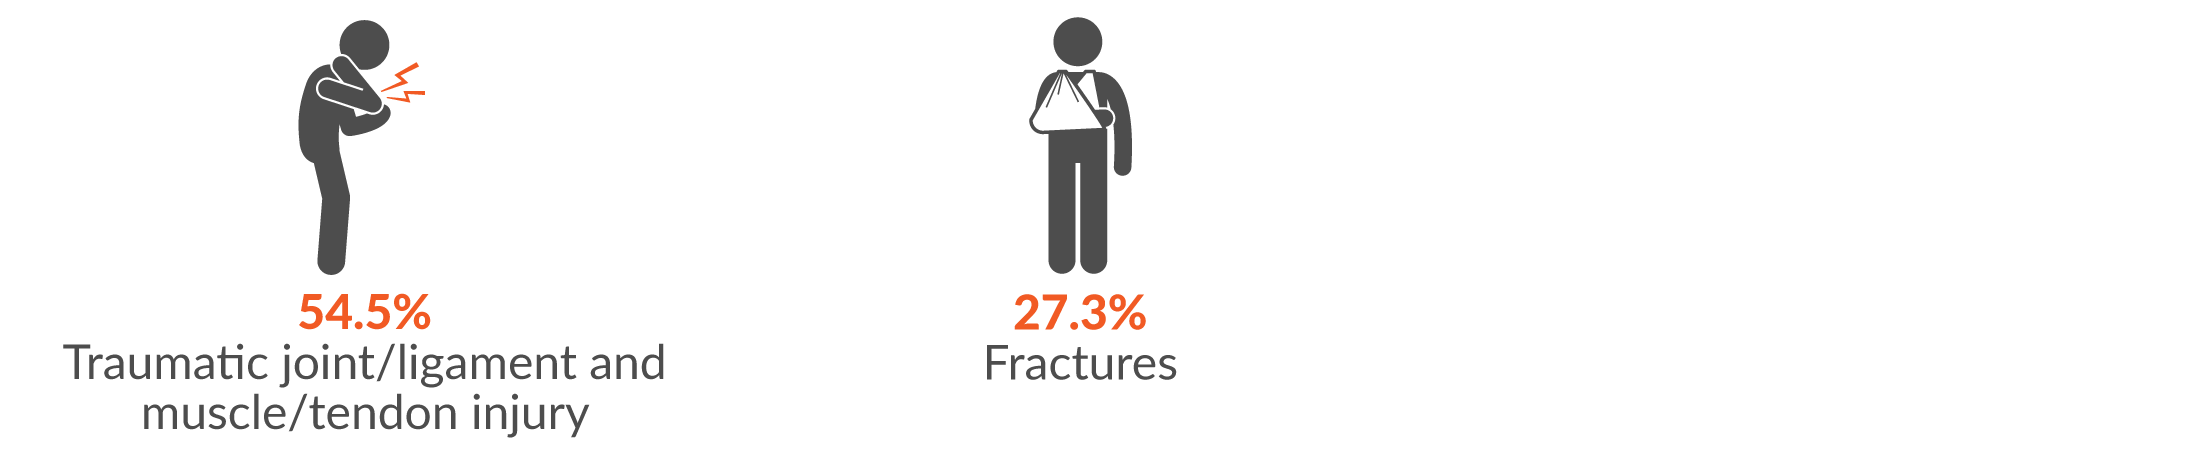 This infographic shows the main two injury groups resulting from falls, trips and slips of a person were 54.5% traumatic joint/ligament and muscle/tendon injury and 27.3% fractures.